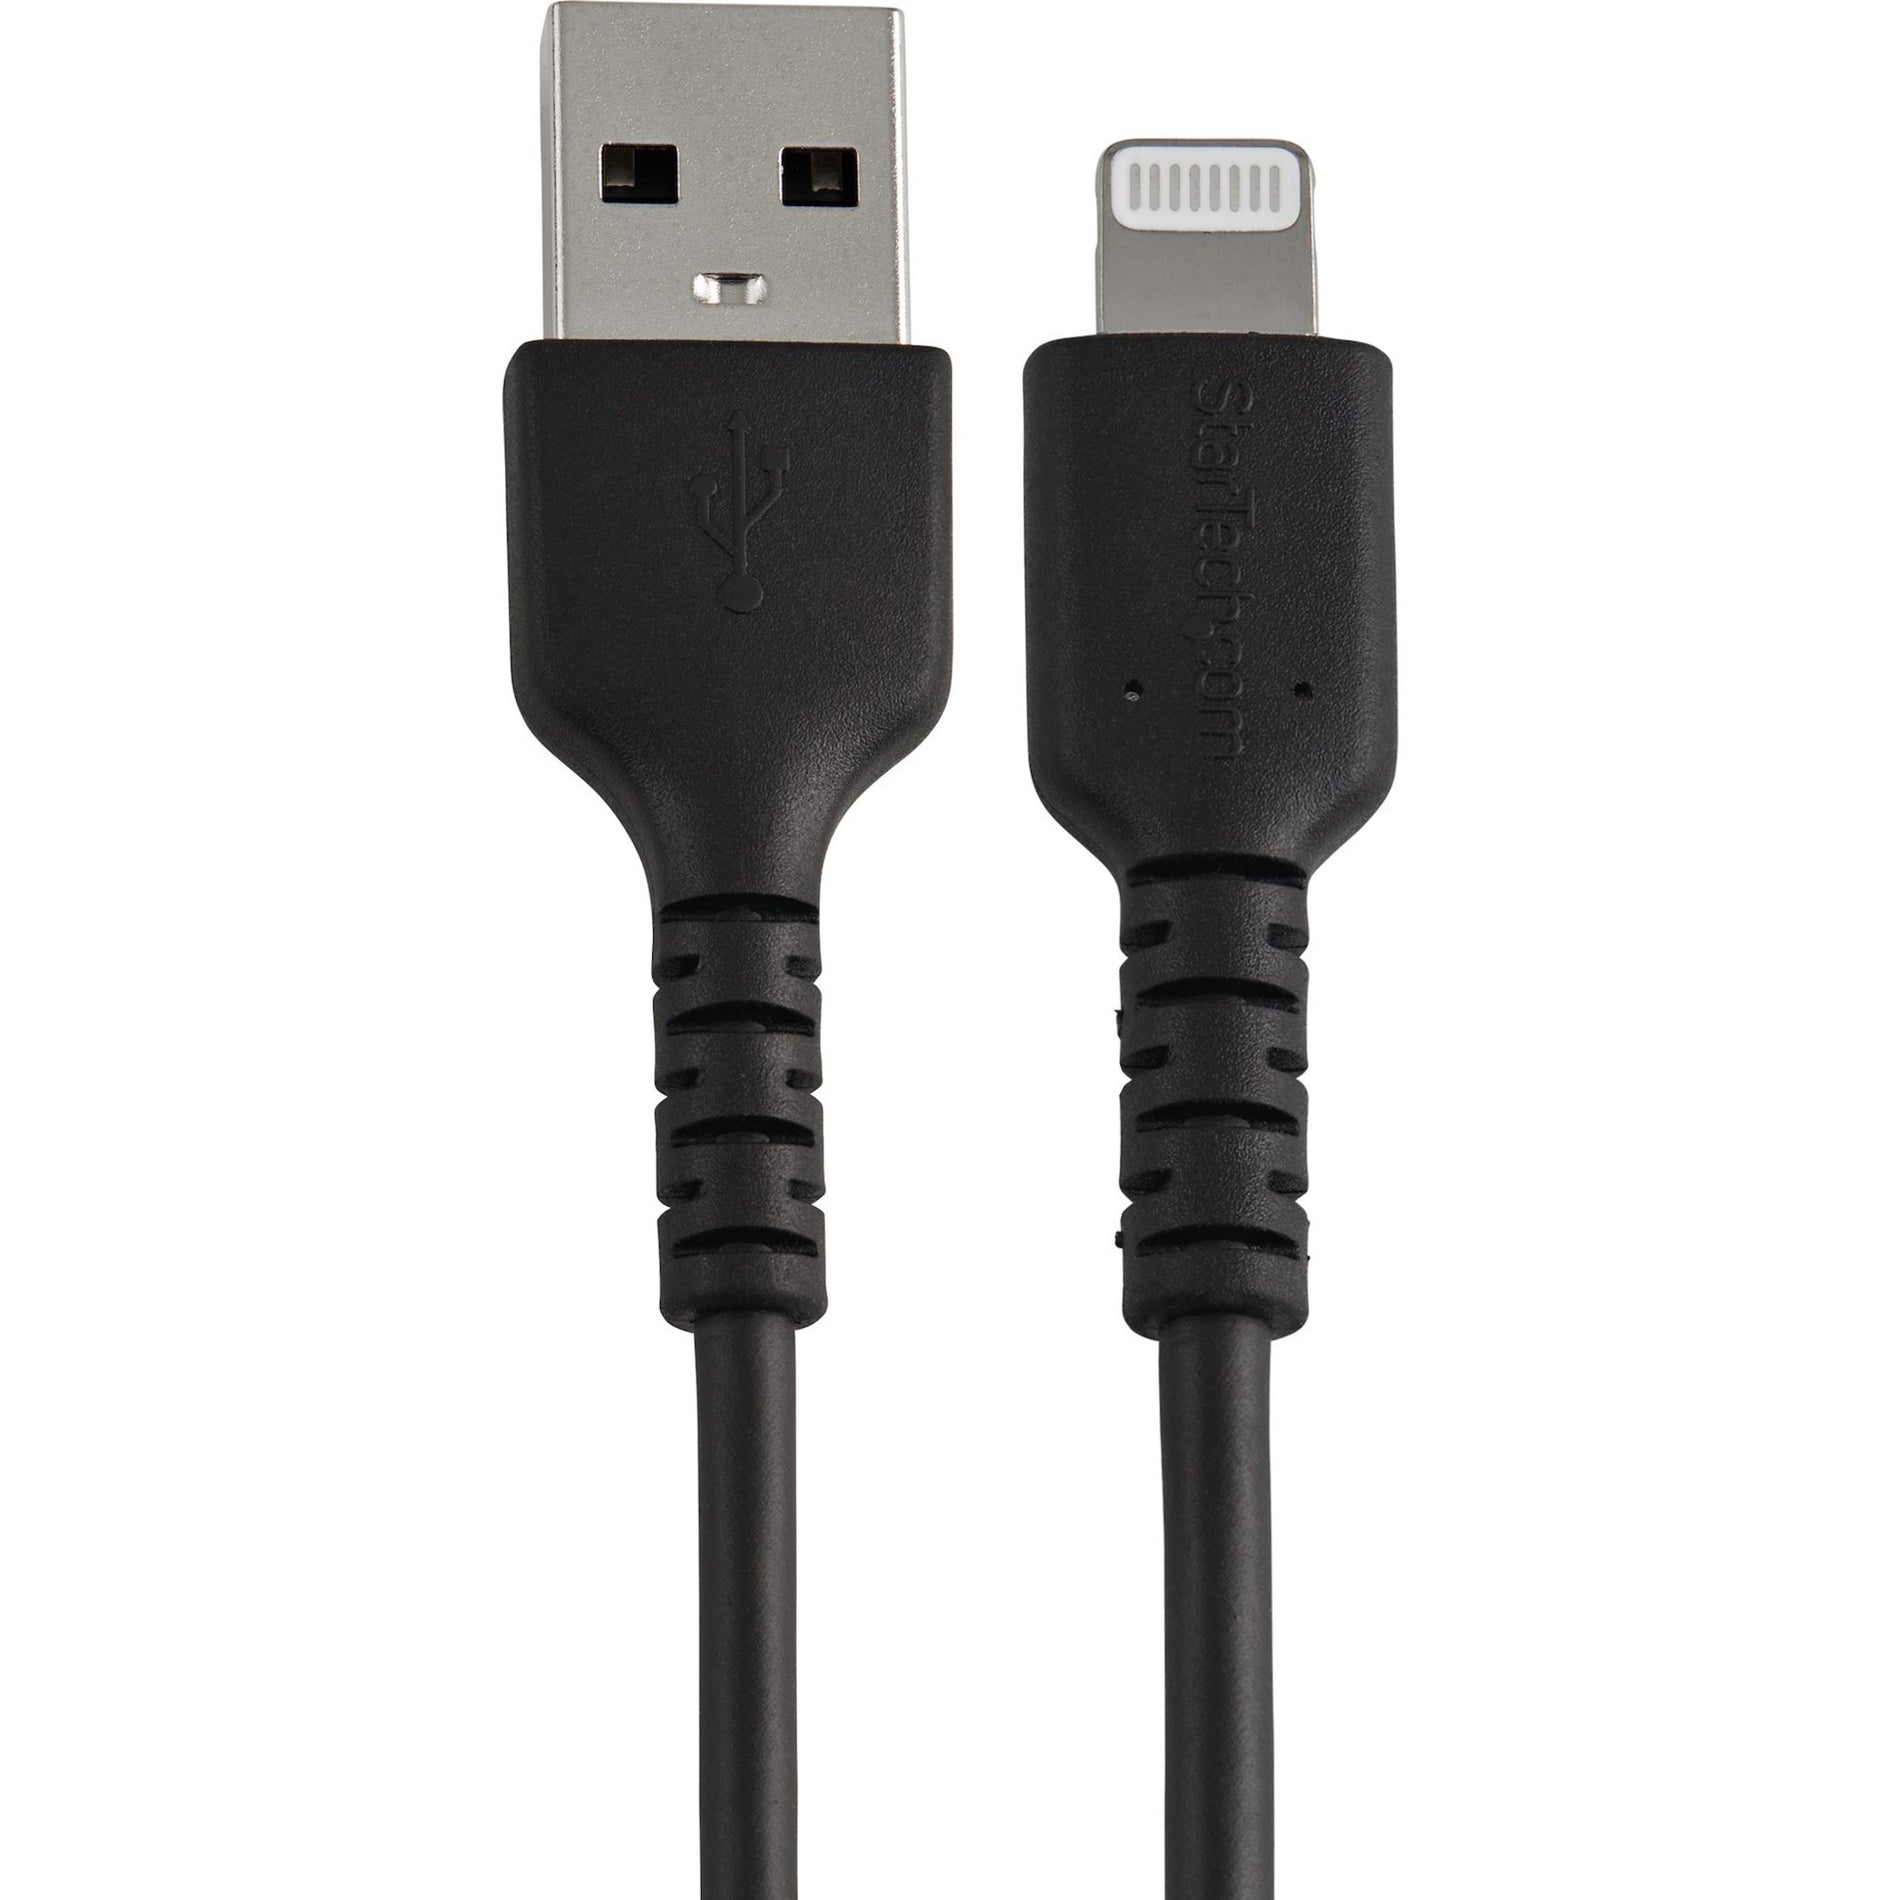 StarTech.com RUSBLTMM30CMB Lightning/USB Data Transfer Cable, Durable Black iPhone iPad Charge/Sync Charger Cord w/ Aramid Fiber, MFI Certified